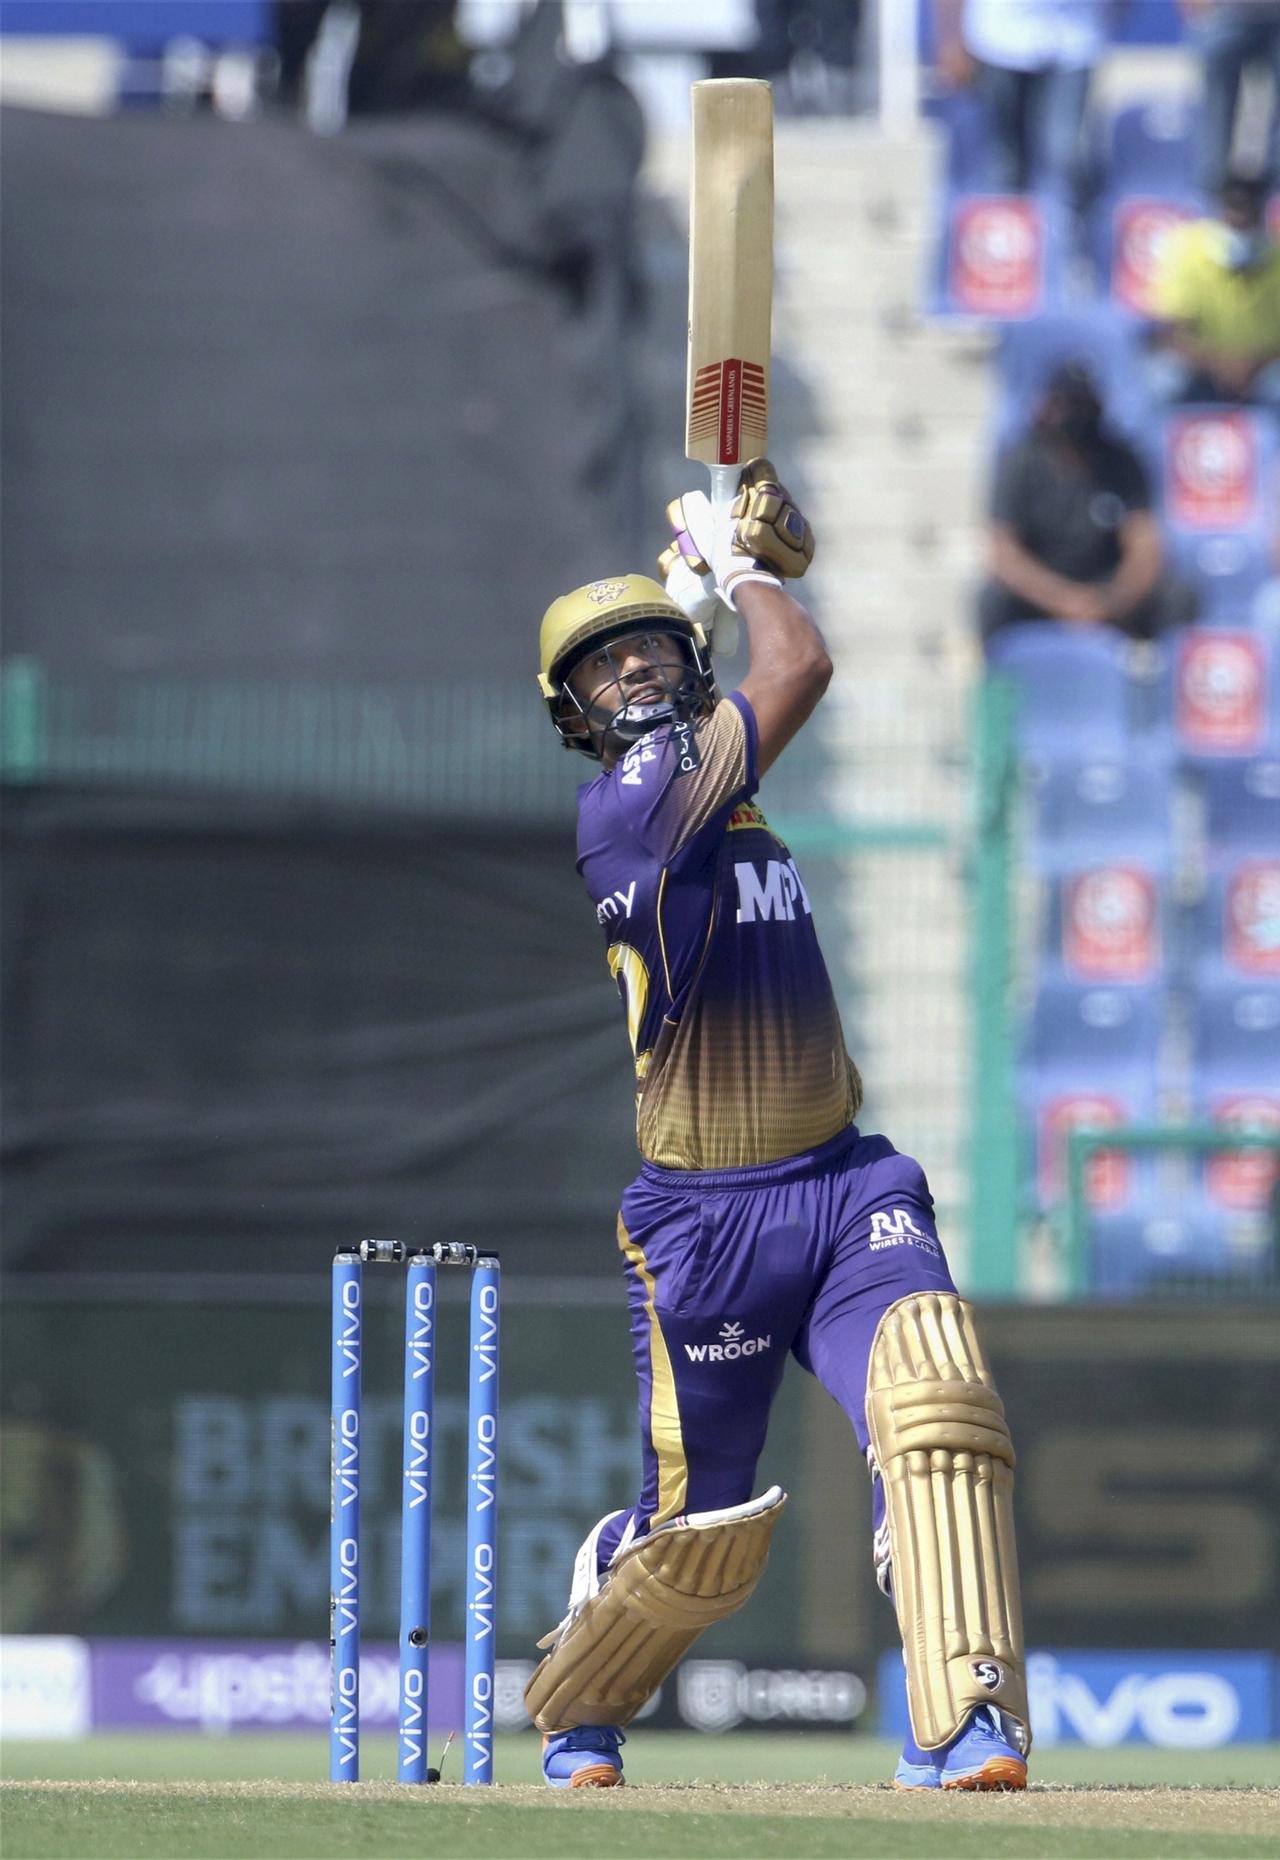 Rahul Tripathi of Kolkata Knight Riders plays a shot during match 38 of the Indian Premier League between the Chennai Super Kings and the Kolkata Knight Riders. Despite Tripathi's brilliant 45 runs, CSK went home with a win courtesy Ravindra Jadeja's 22 off 8 balls. Pic/ PTI